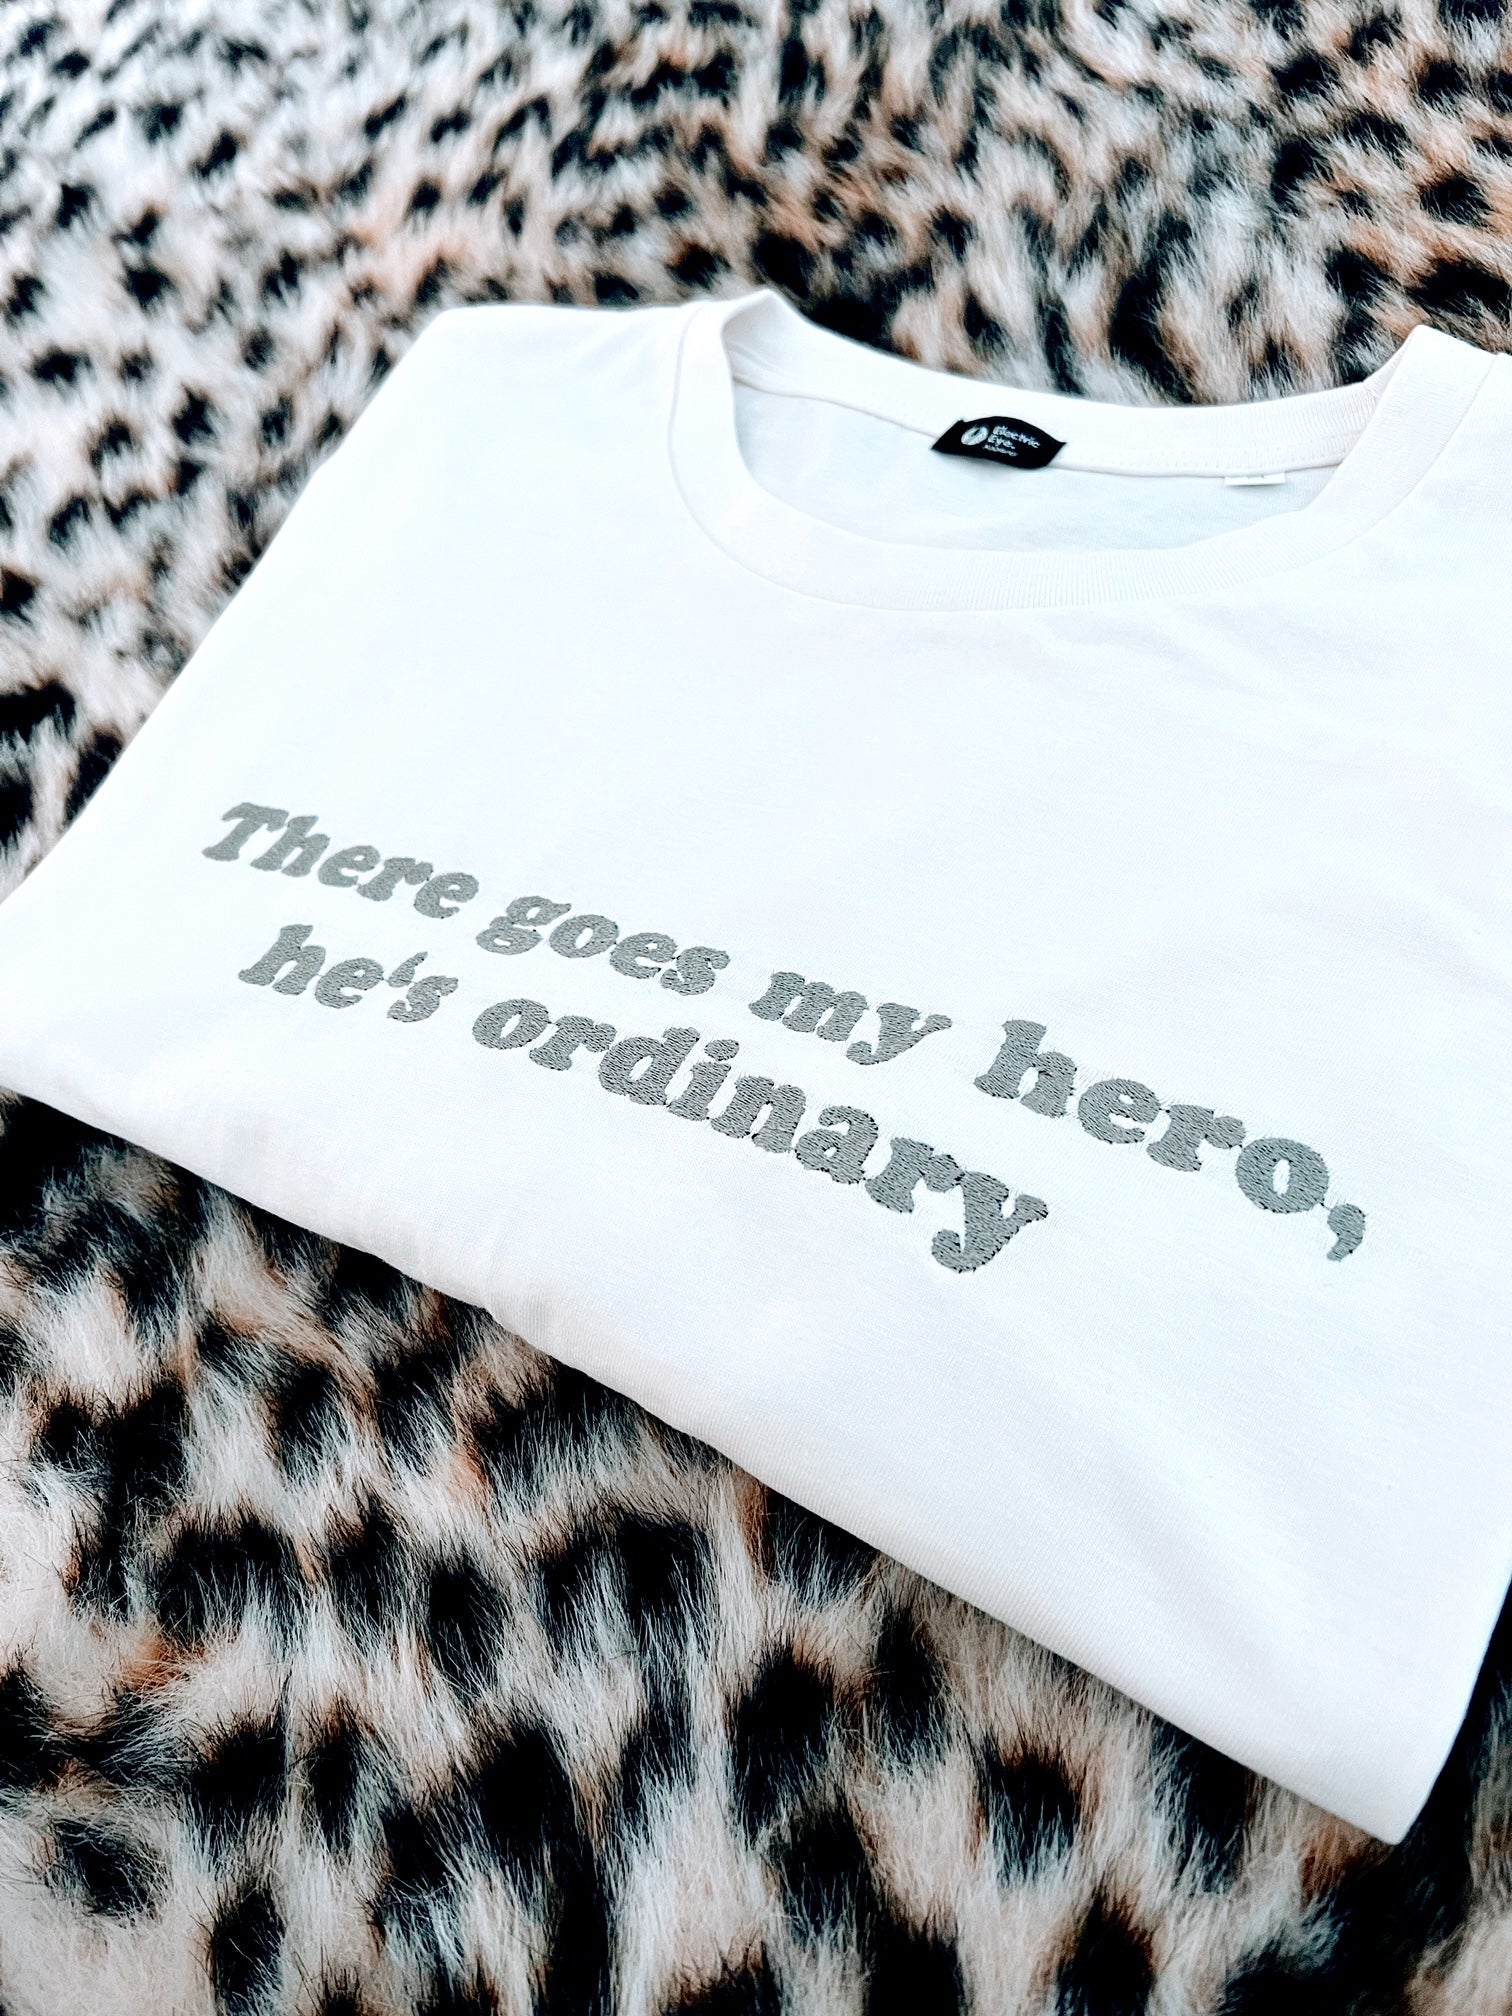 SAMPLE SALE 'THERE GOES MY HERO, HE'S ORDINARY' EMBROIDERED UNISEX MEDIUM FIT ORGANIC COTTON 'ROCKER' T-SHIRT (SIZE SMALL)